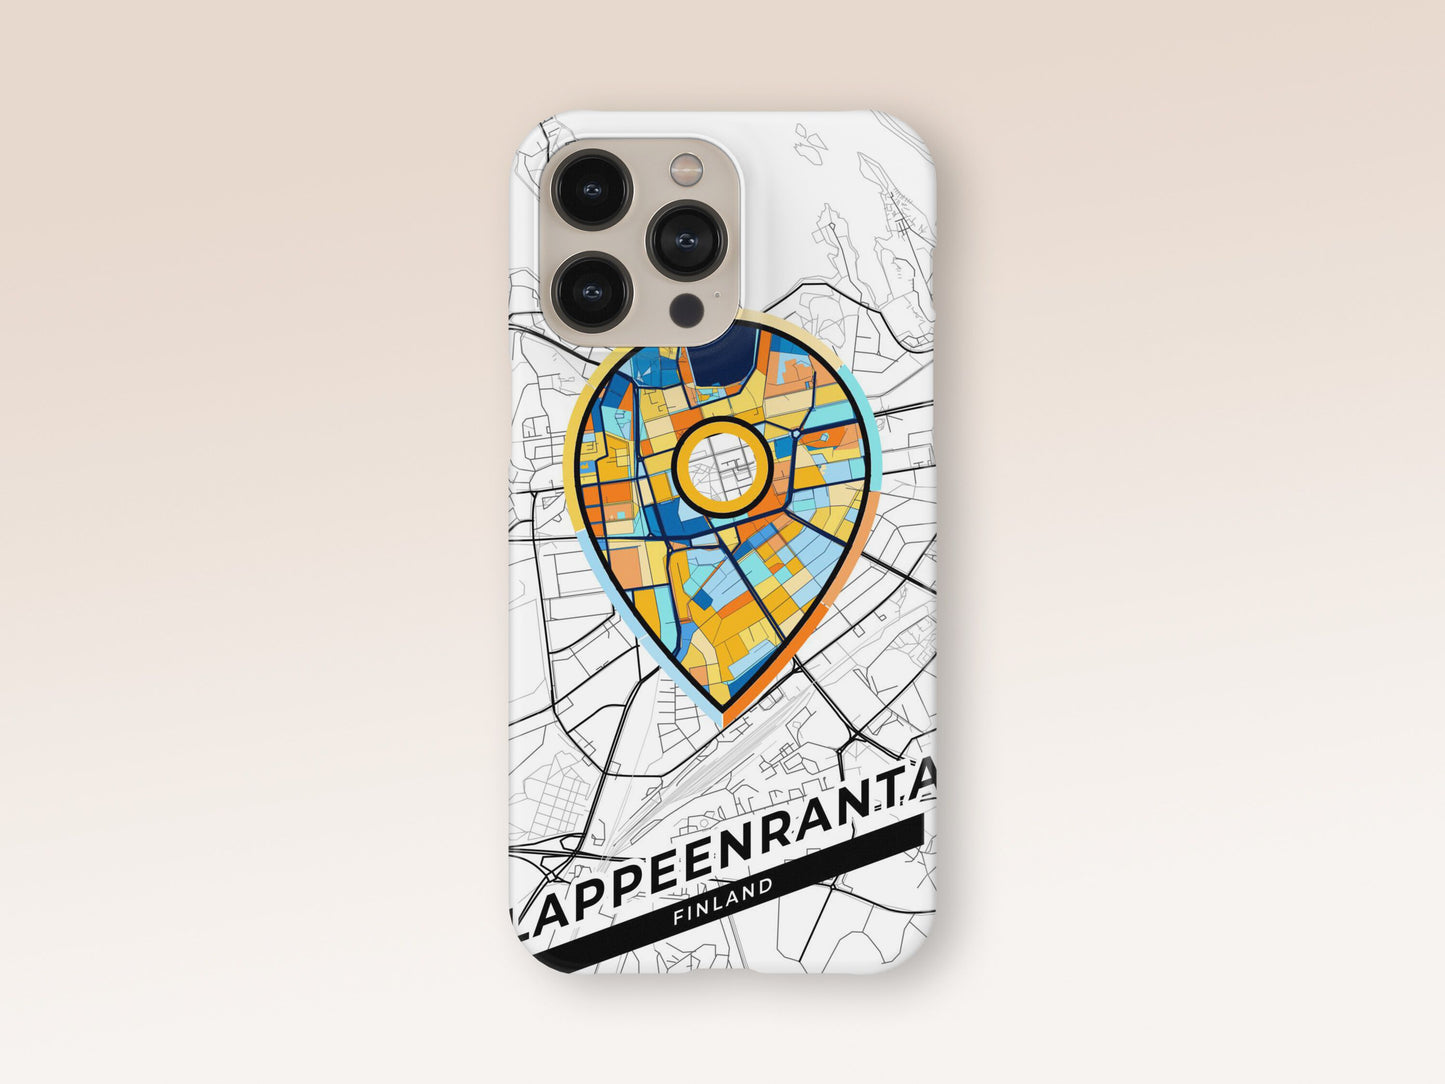 Lappeenranta Finland slim phone case with colorful icon. Birthday, wedding or housewarming gift. Couple match cases. 1